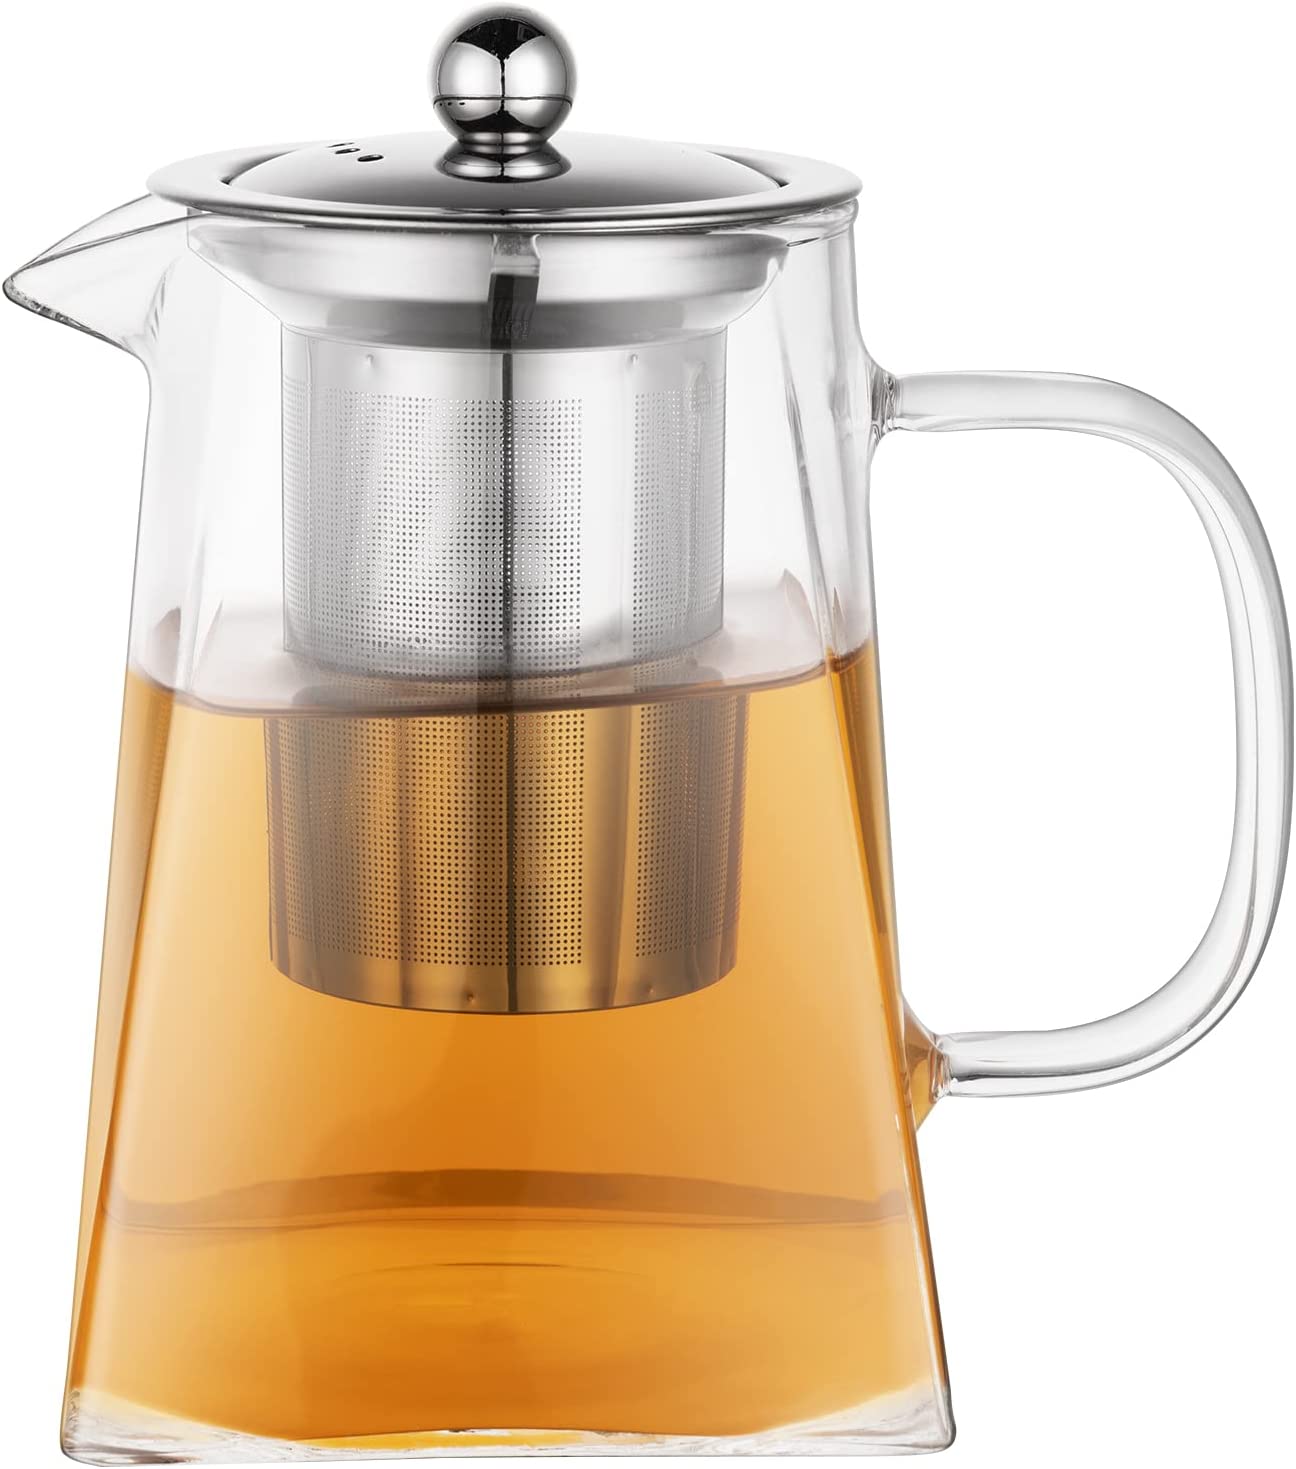 Wisolt Glass Teapots with Removable Infuser, Tall Borosilicate Glass Teapot for Loose Leaves, Square Shape, Stainless Steel Sieve & Stainless Steel Lid, transparent, 950ml